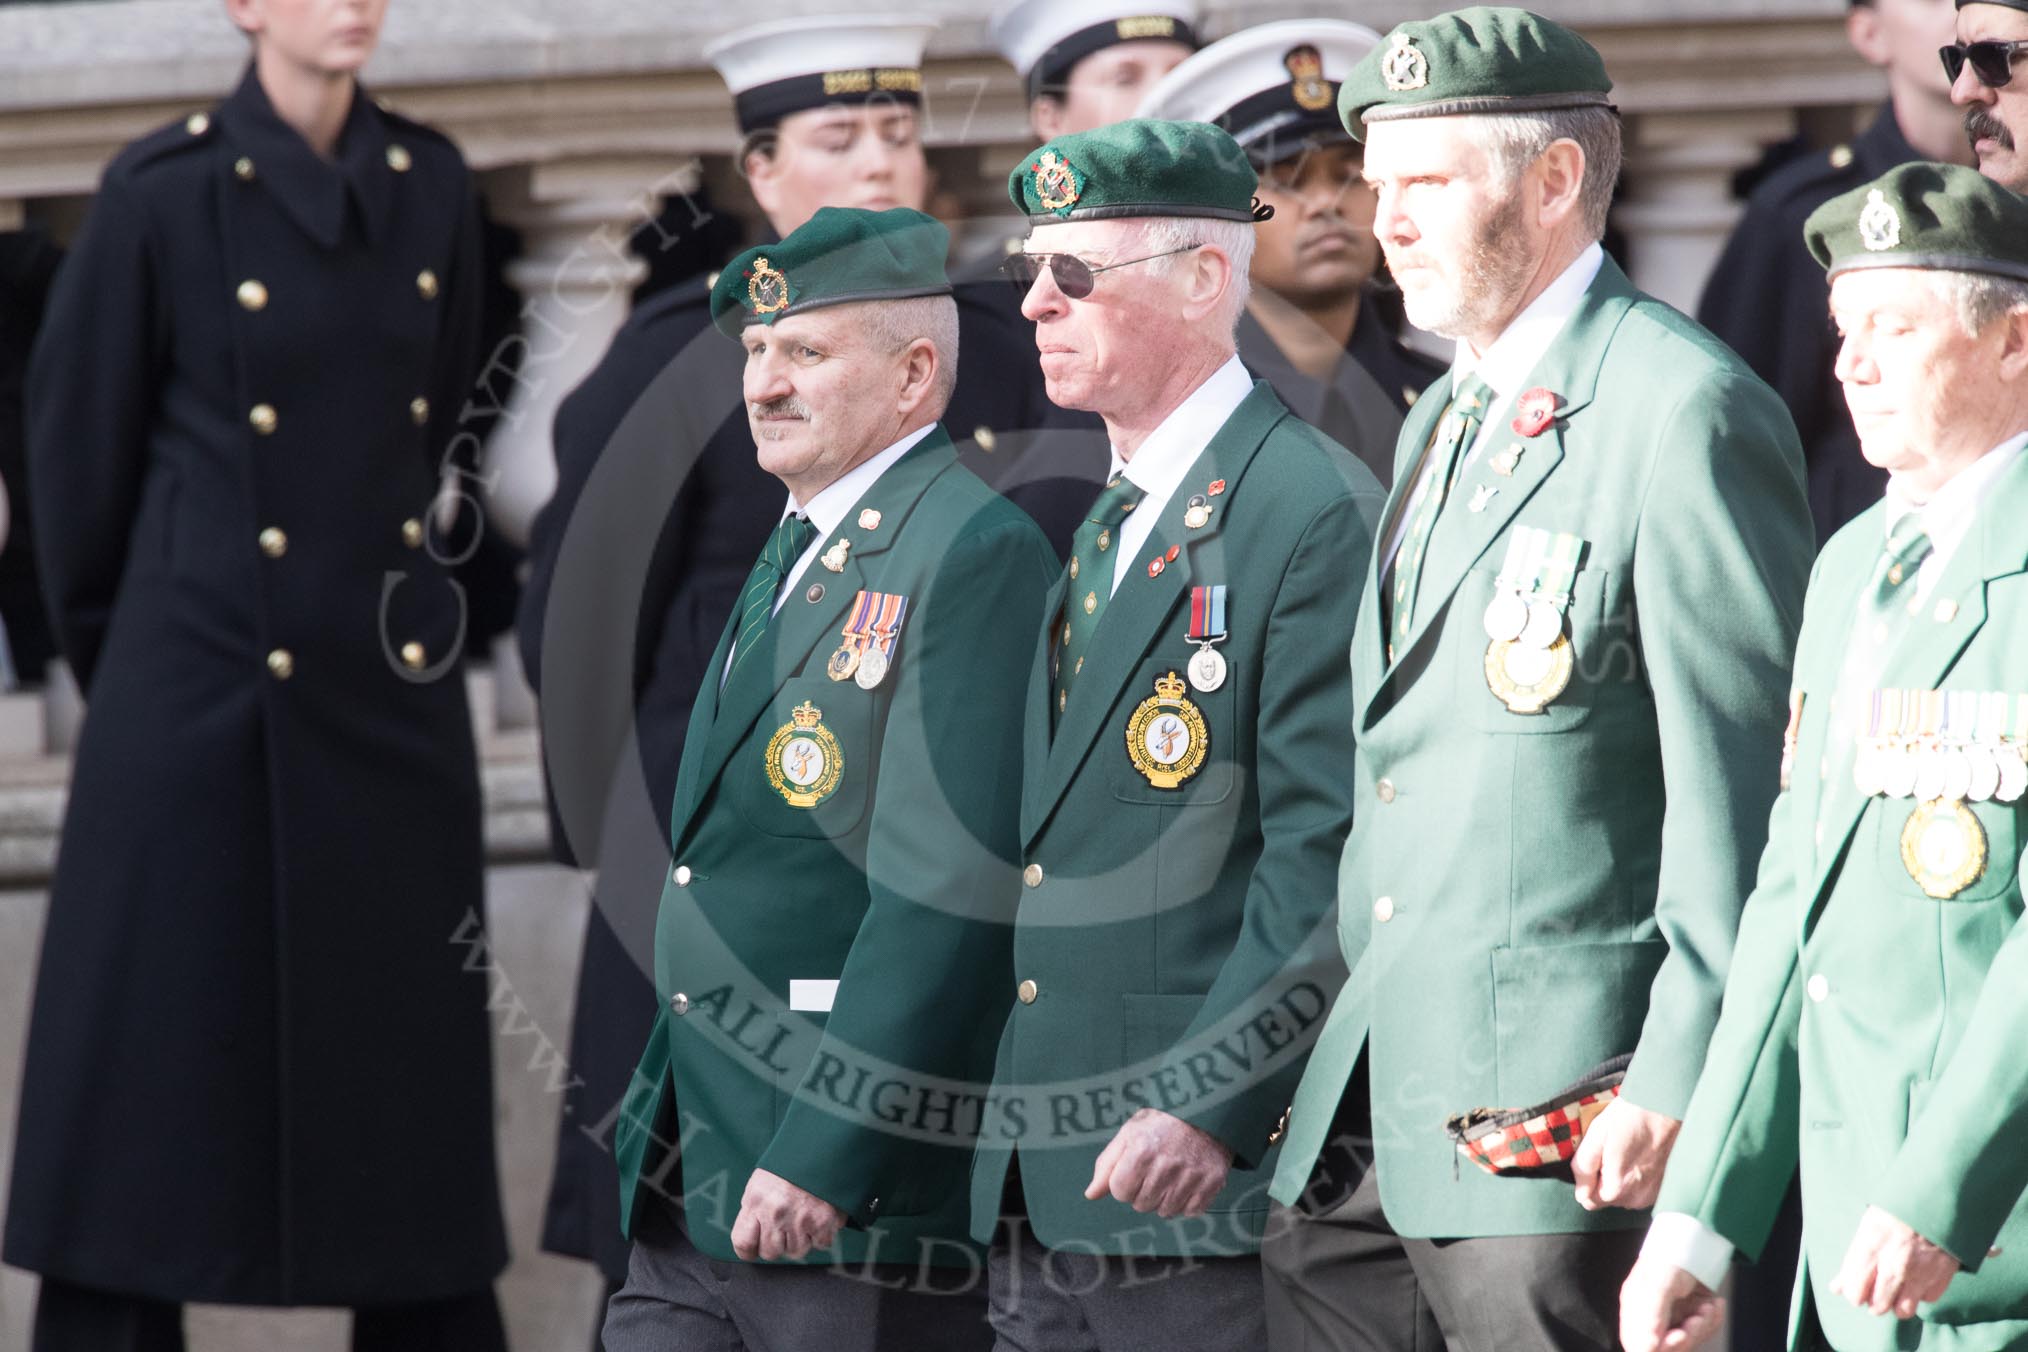 The South African Legion (Group D??) during the Royal British Legion March Past on Remembrance Sunday at the Cenotaph, Whitehall, Westminster, London, 11 November 2018, 12:23.